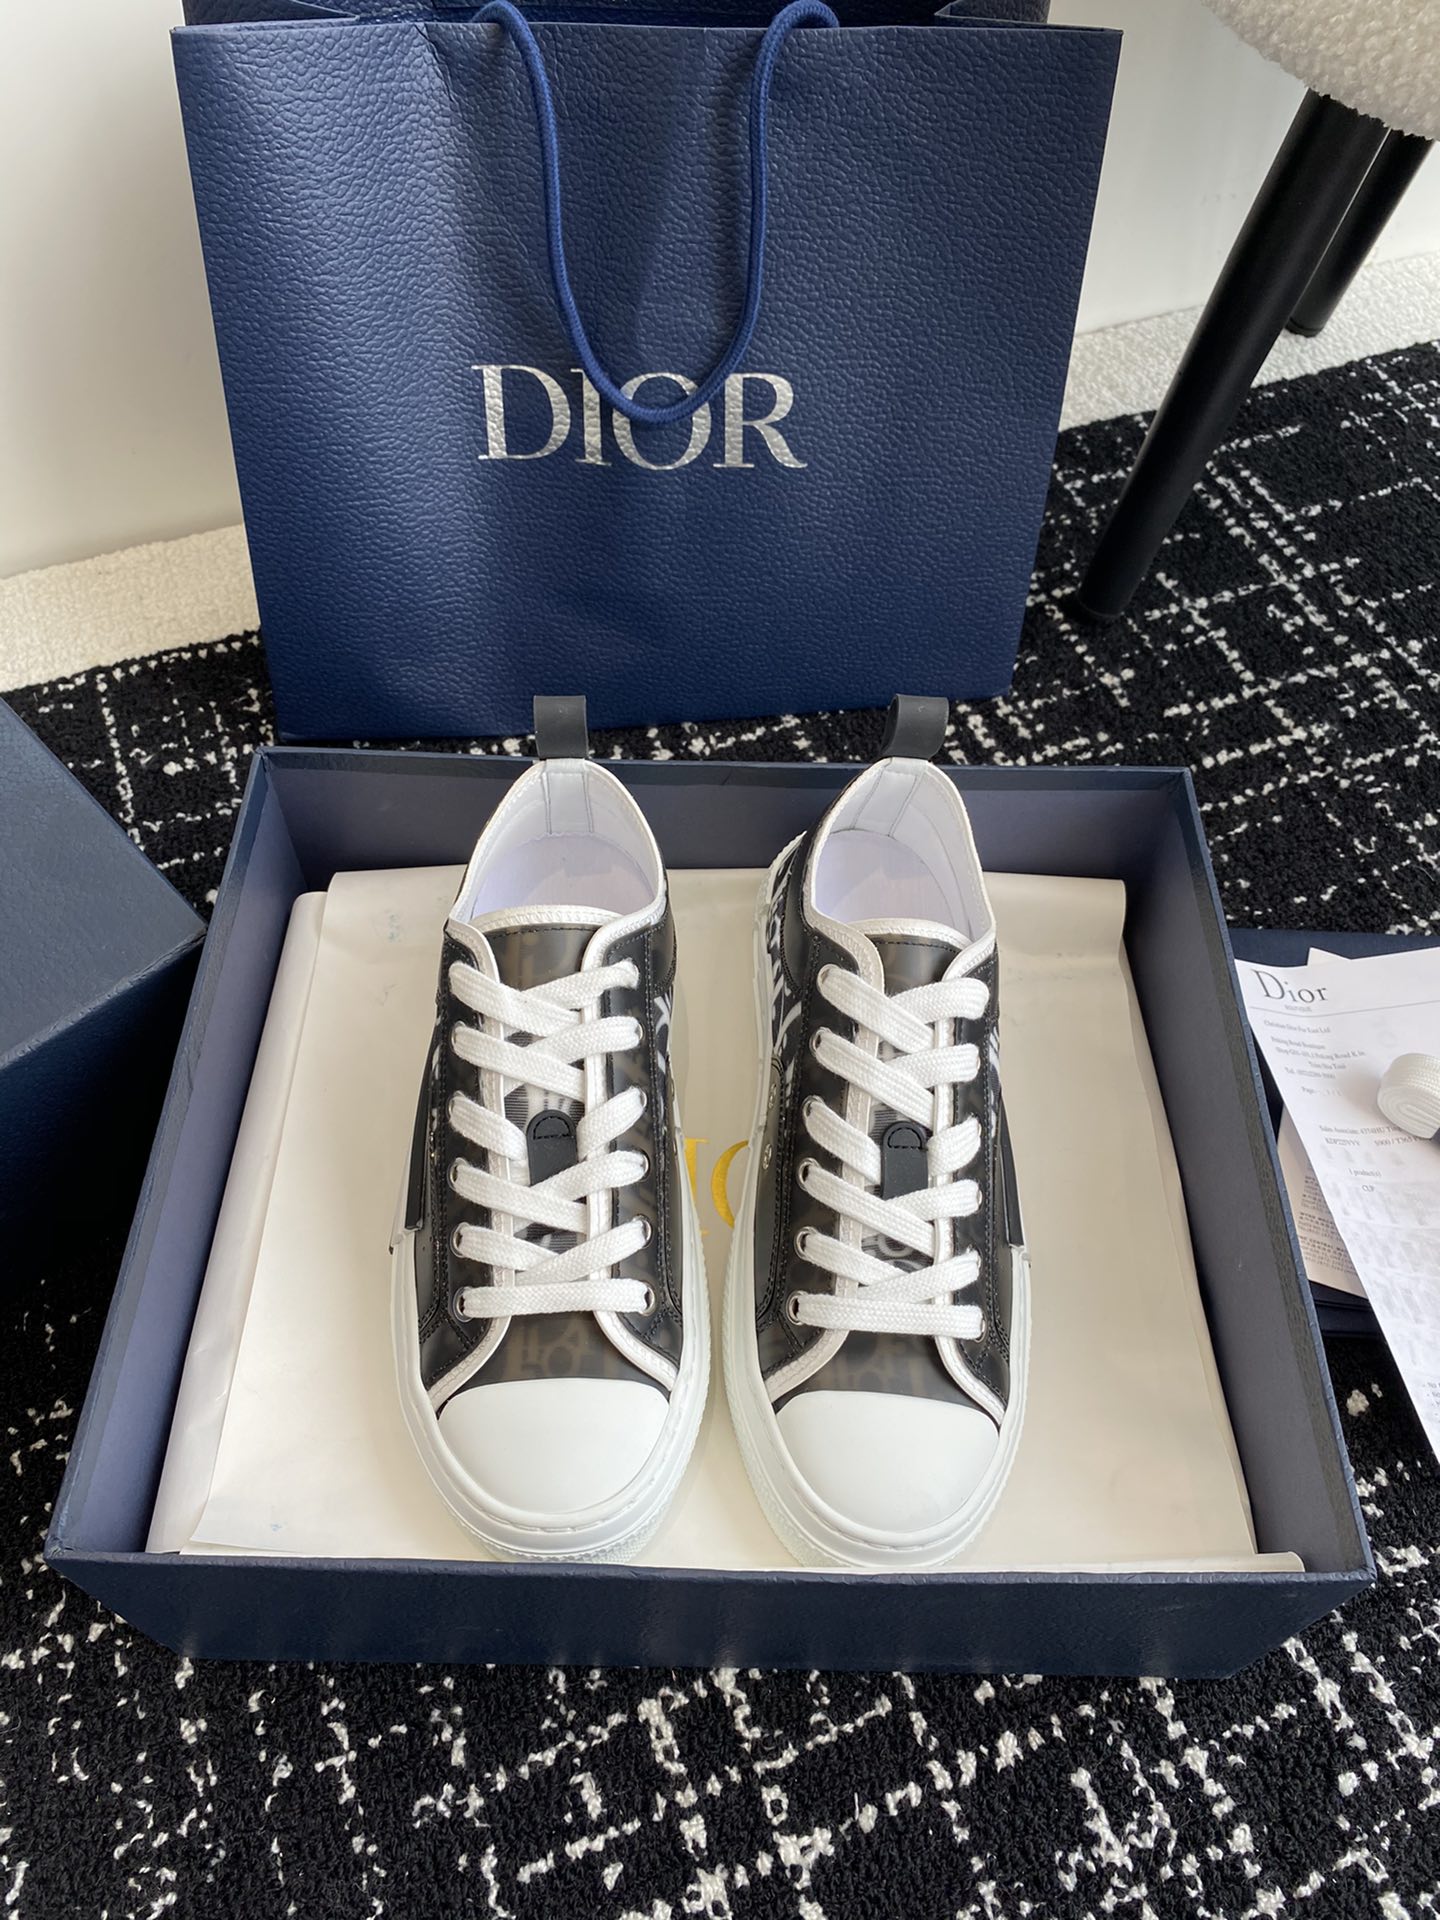 Buy High-Quality Fake
 Dior Wholesale
 Skateboard Shoes Sneakers Printing Unisex Women Men Canvas TPU Oblique High Tops